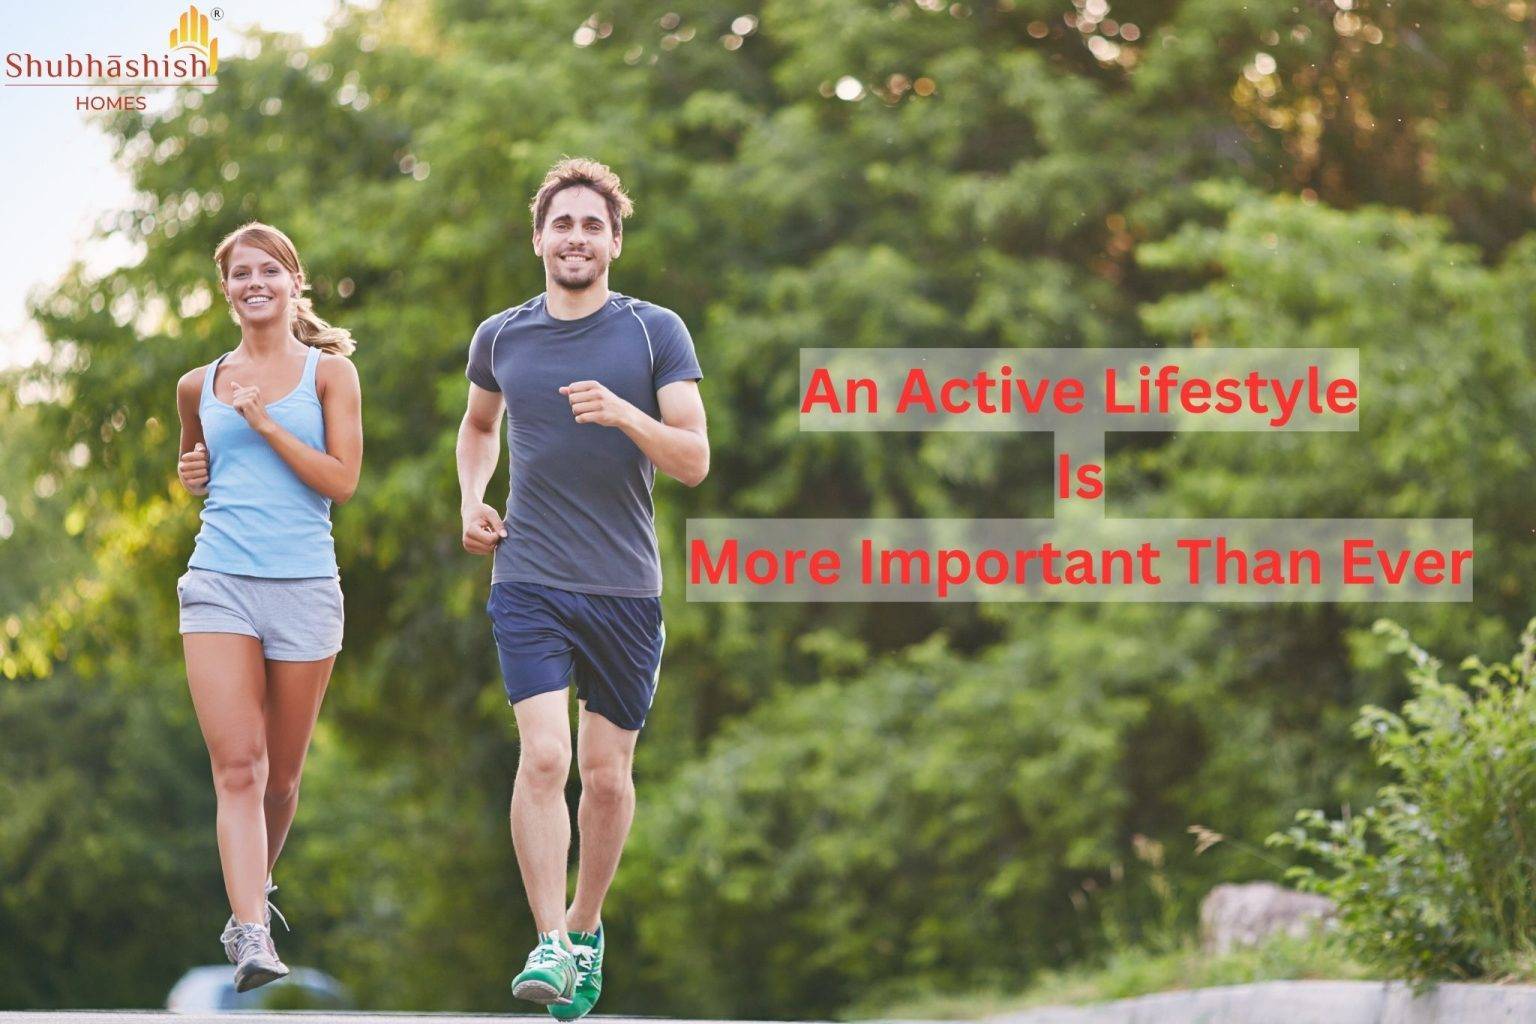 An Active Lifestyle is More Important Than Ever